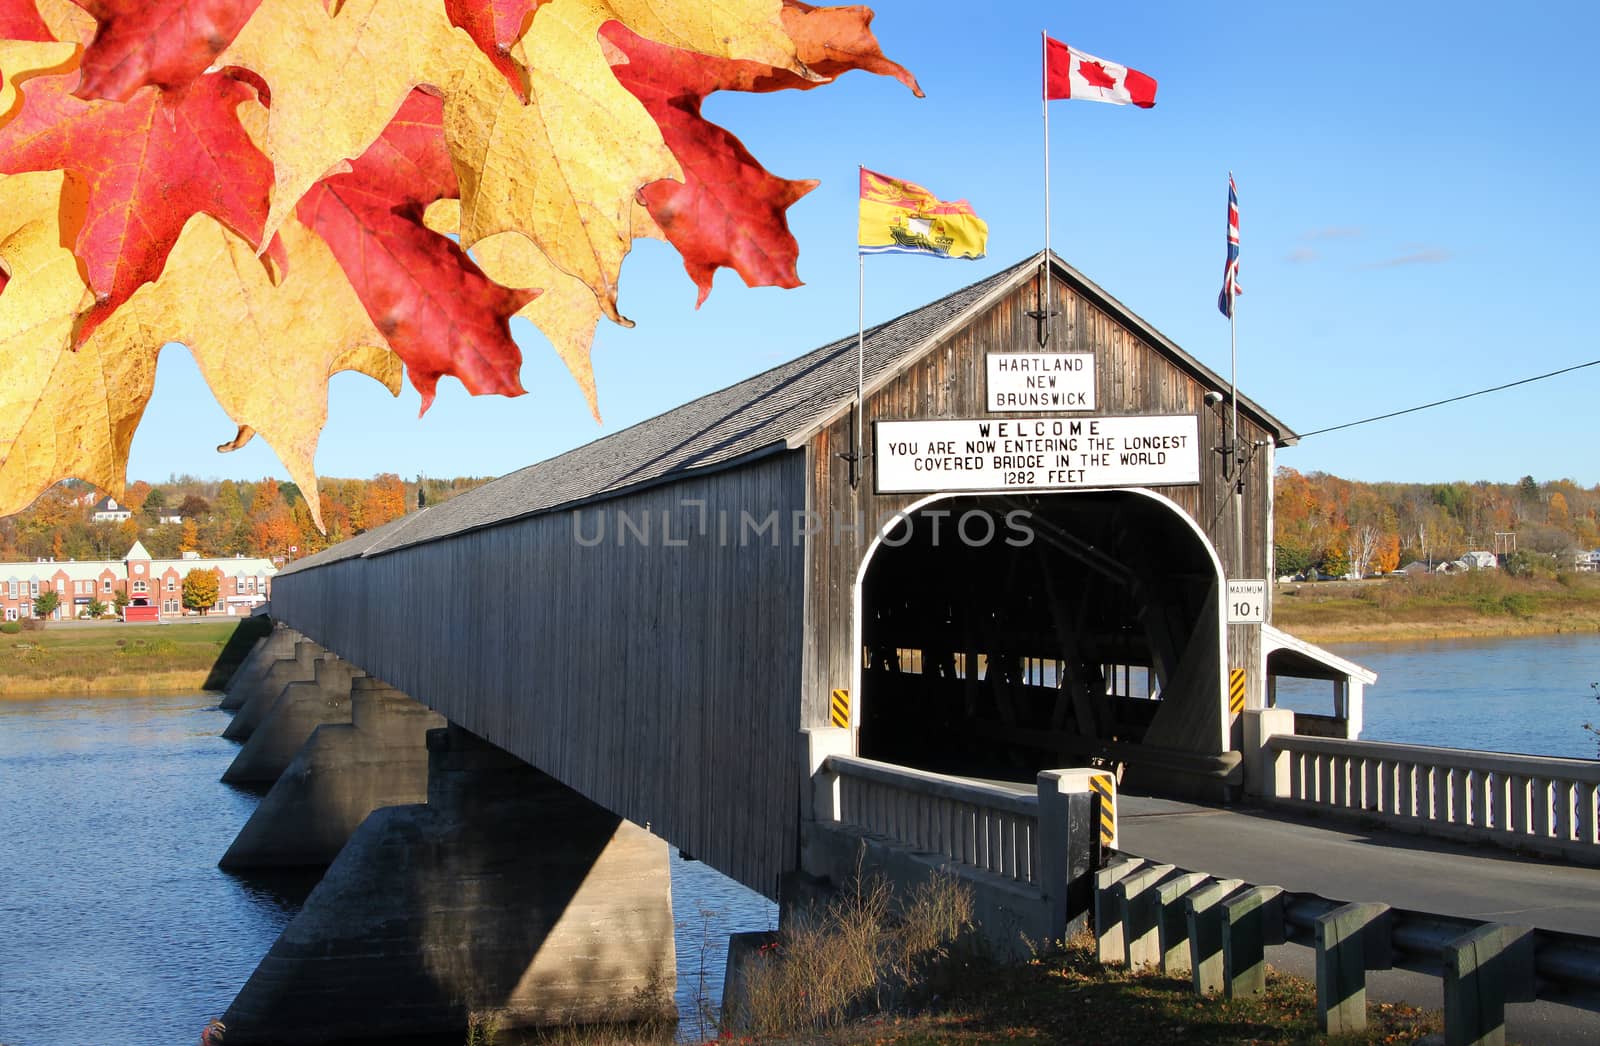 The longest wooden covered bridge in the world located in Hartland, New Brunwick, Canada in Autumn time with colorful maple leaves